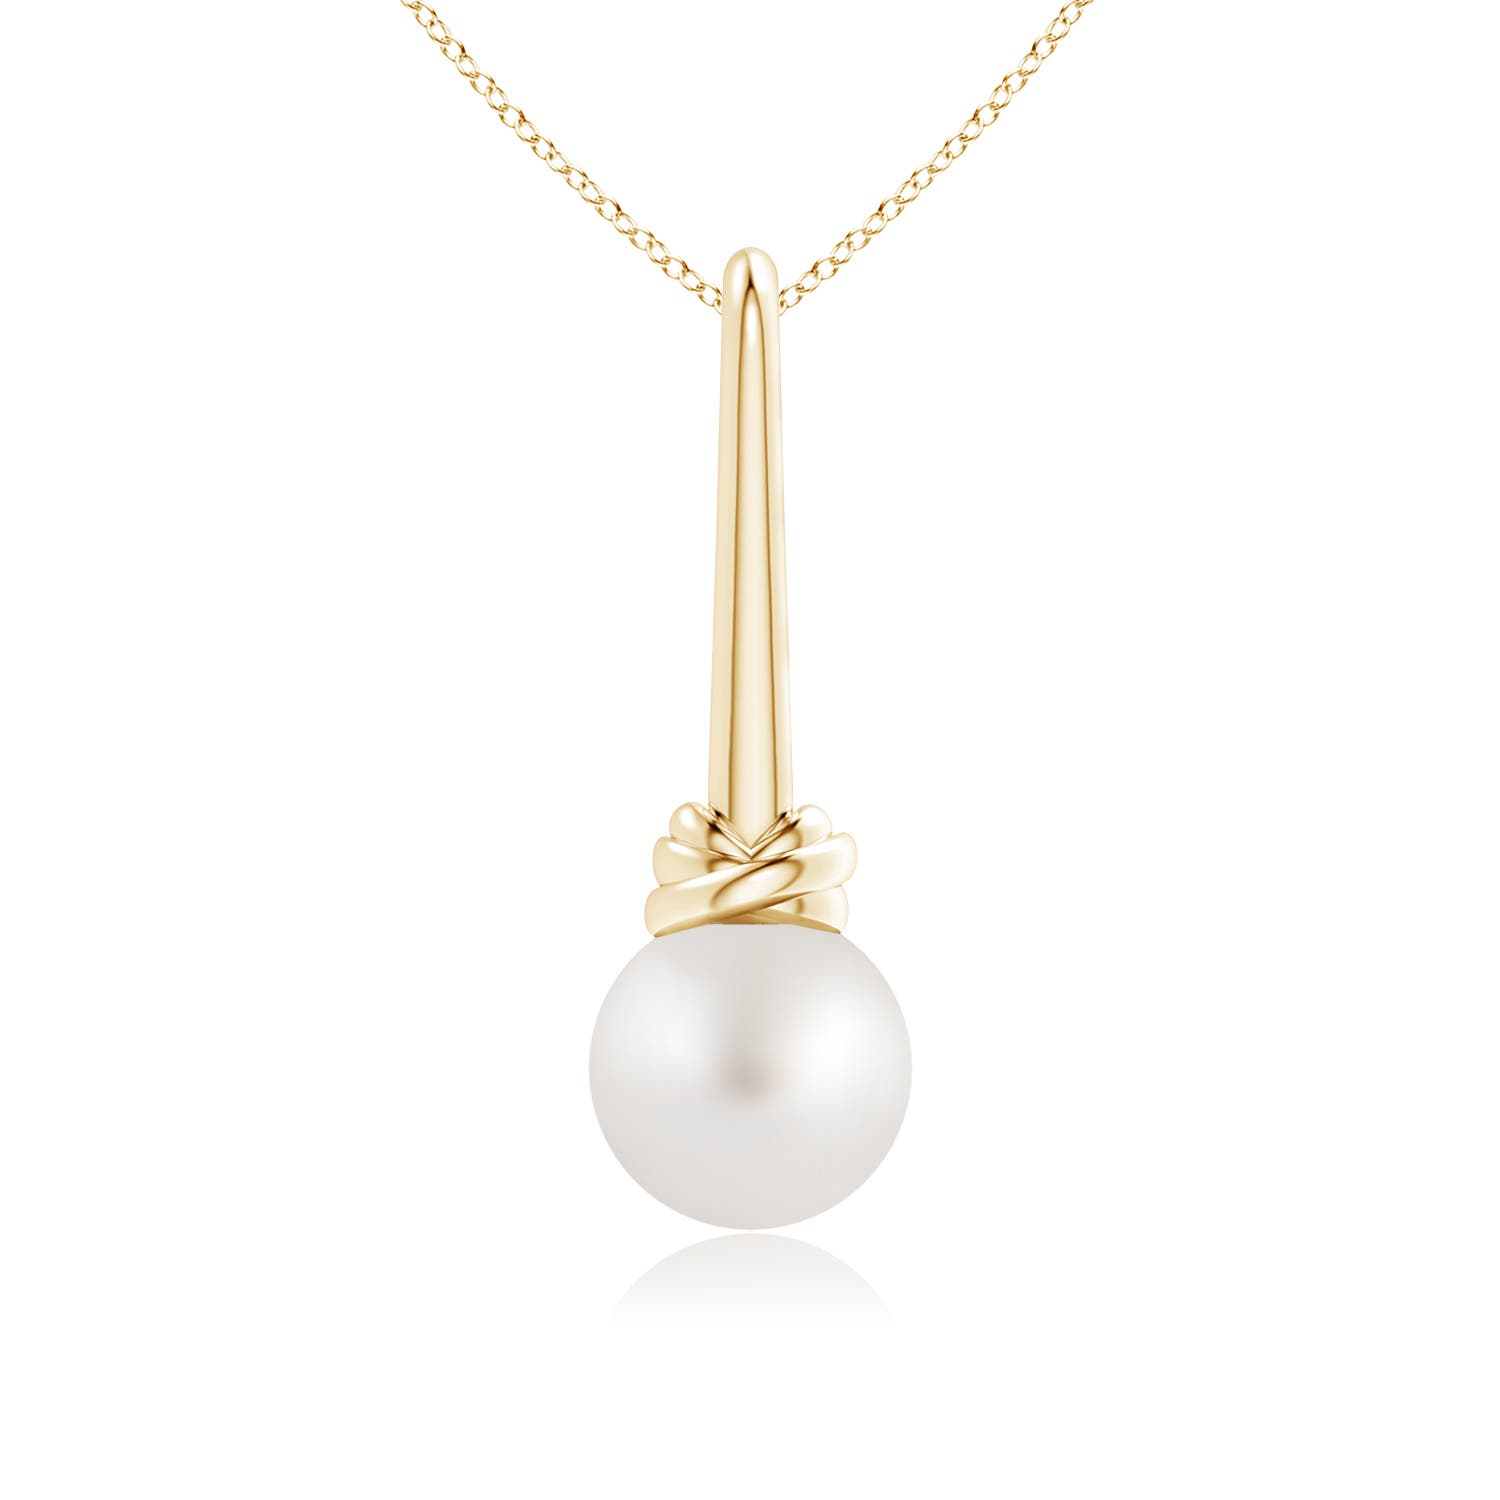 AA - South Sea Cultured Pearl / 5.25 CT / 14 KT Yellow Gold